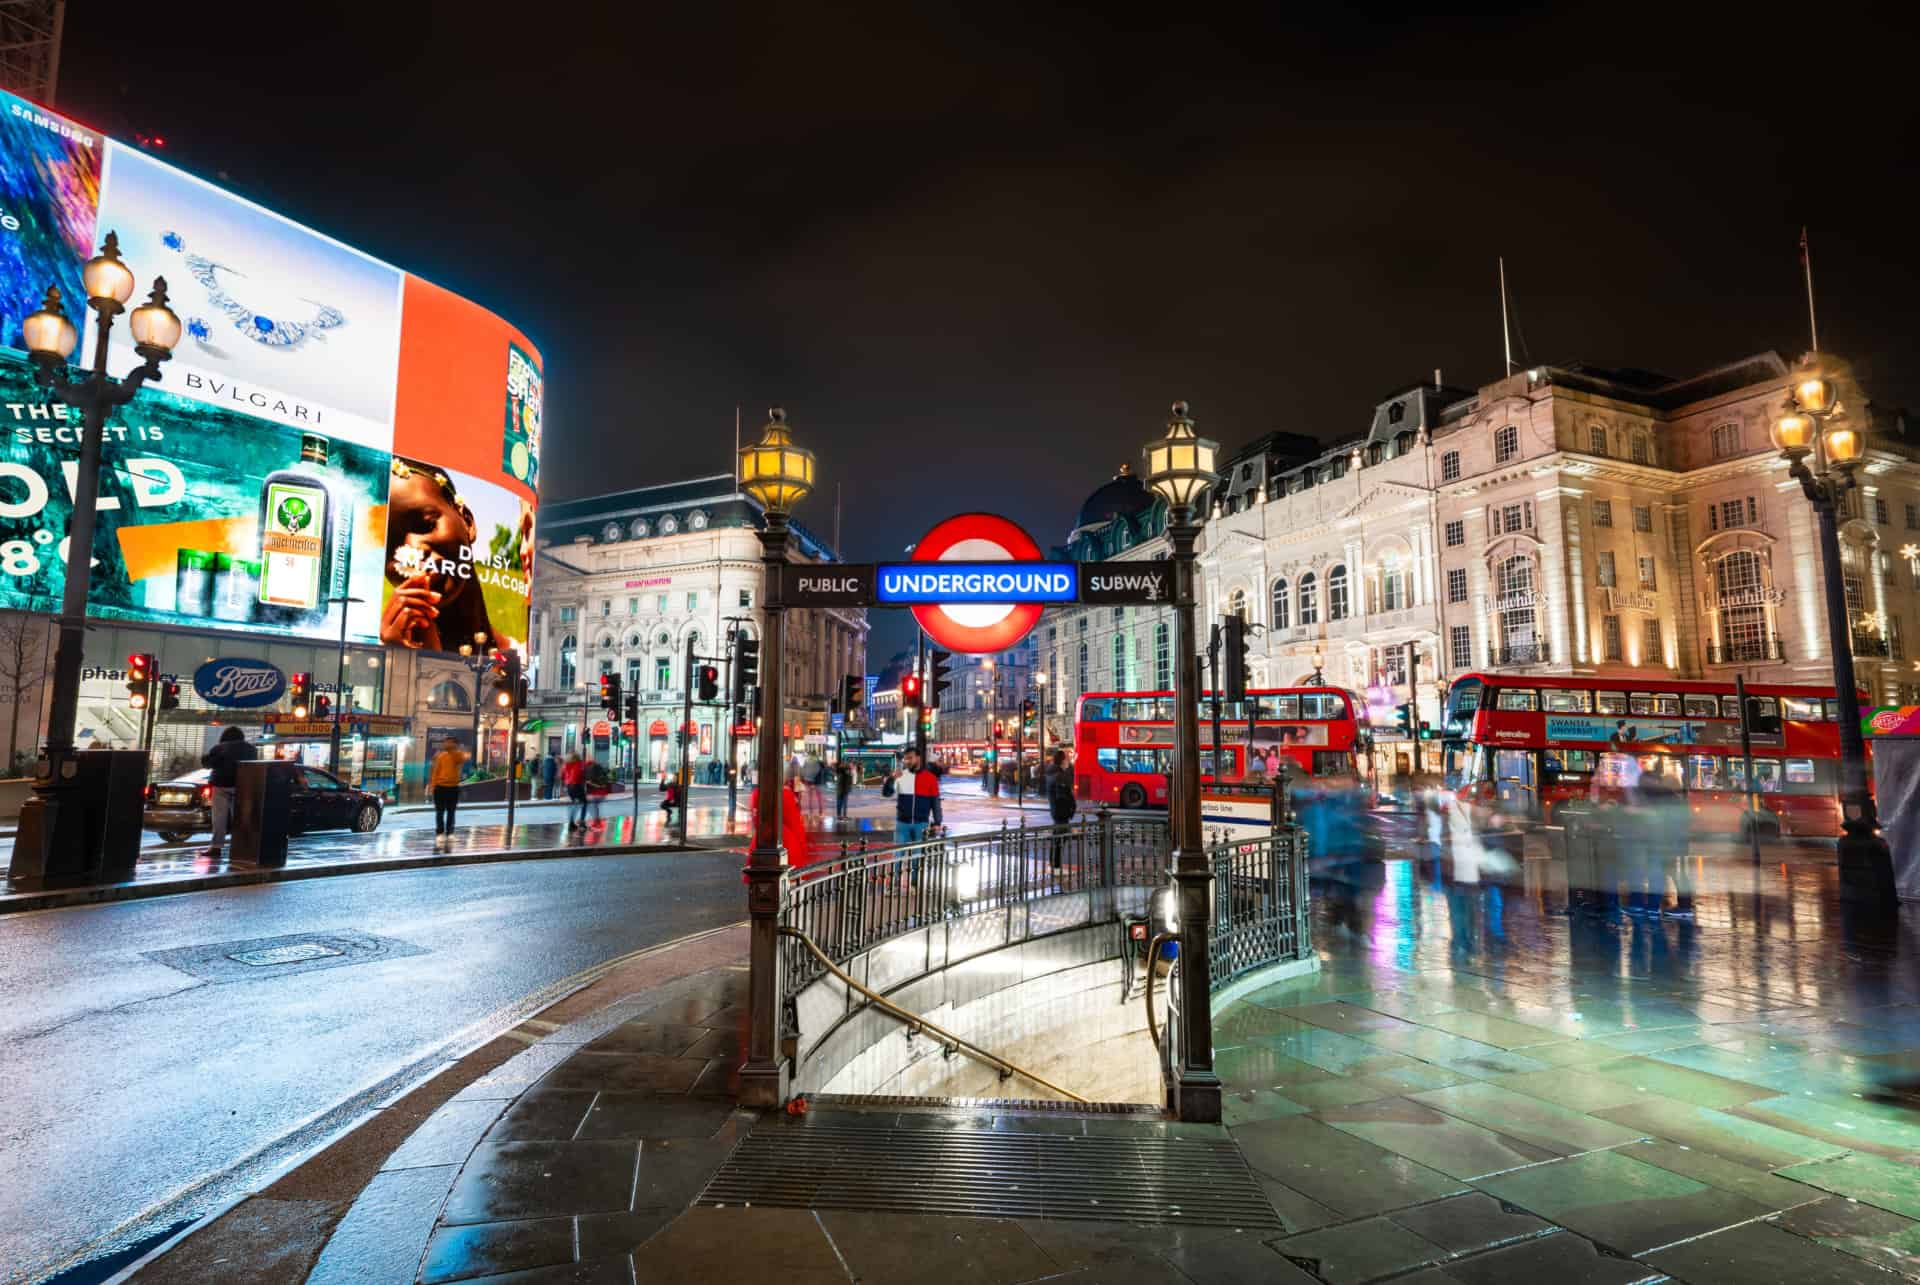 picadilly circus visiter londres en 4 jours